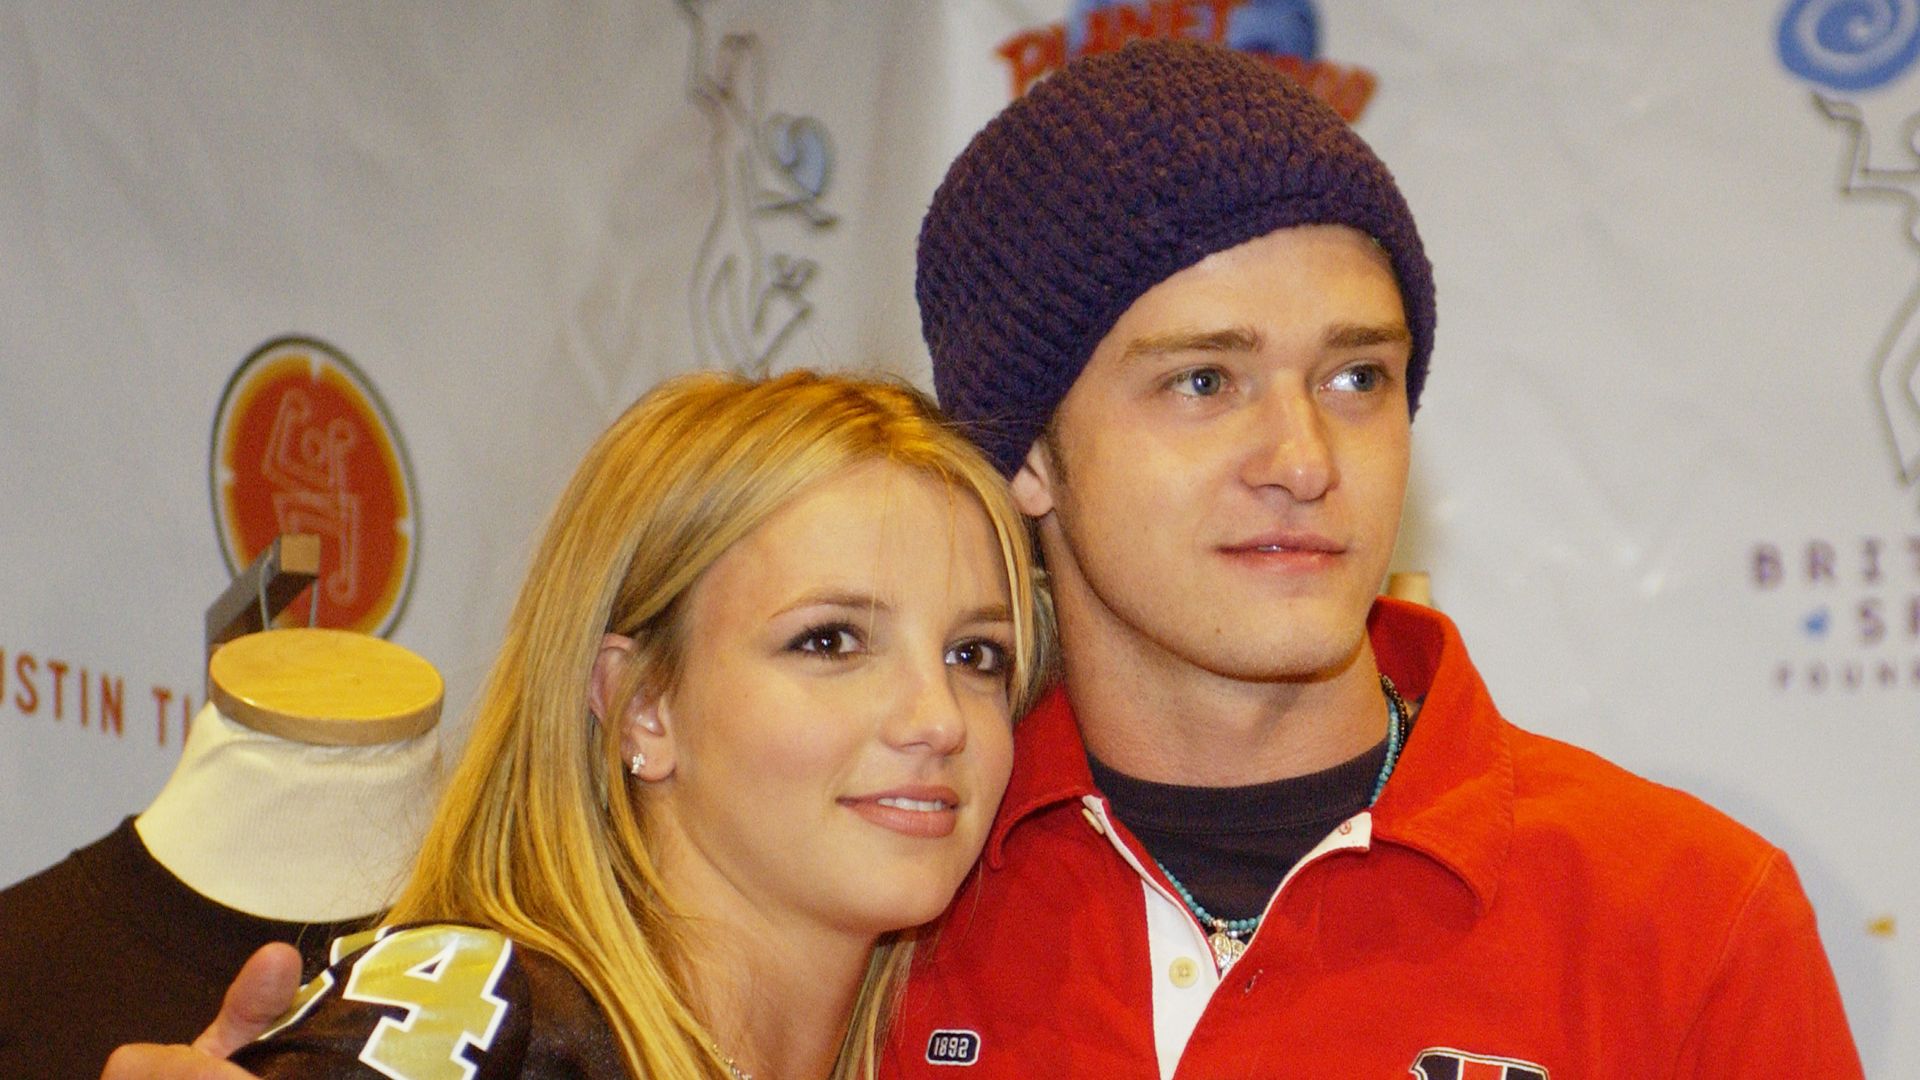 Britney Spears & Justin Timberlake Host Super Bowl Fundraiser at Planet Hollywood Times Square at Planet Hollywood Times Square in New York City, New York, 2002